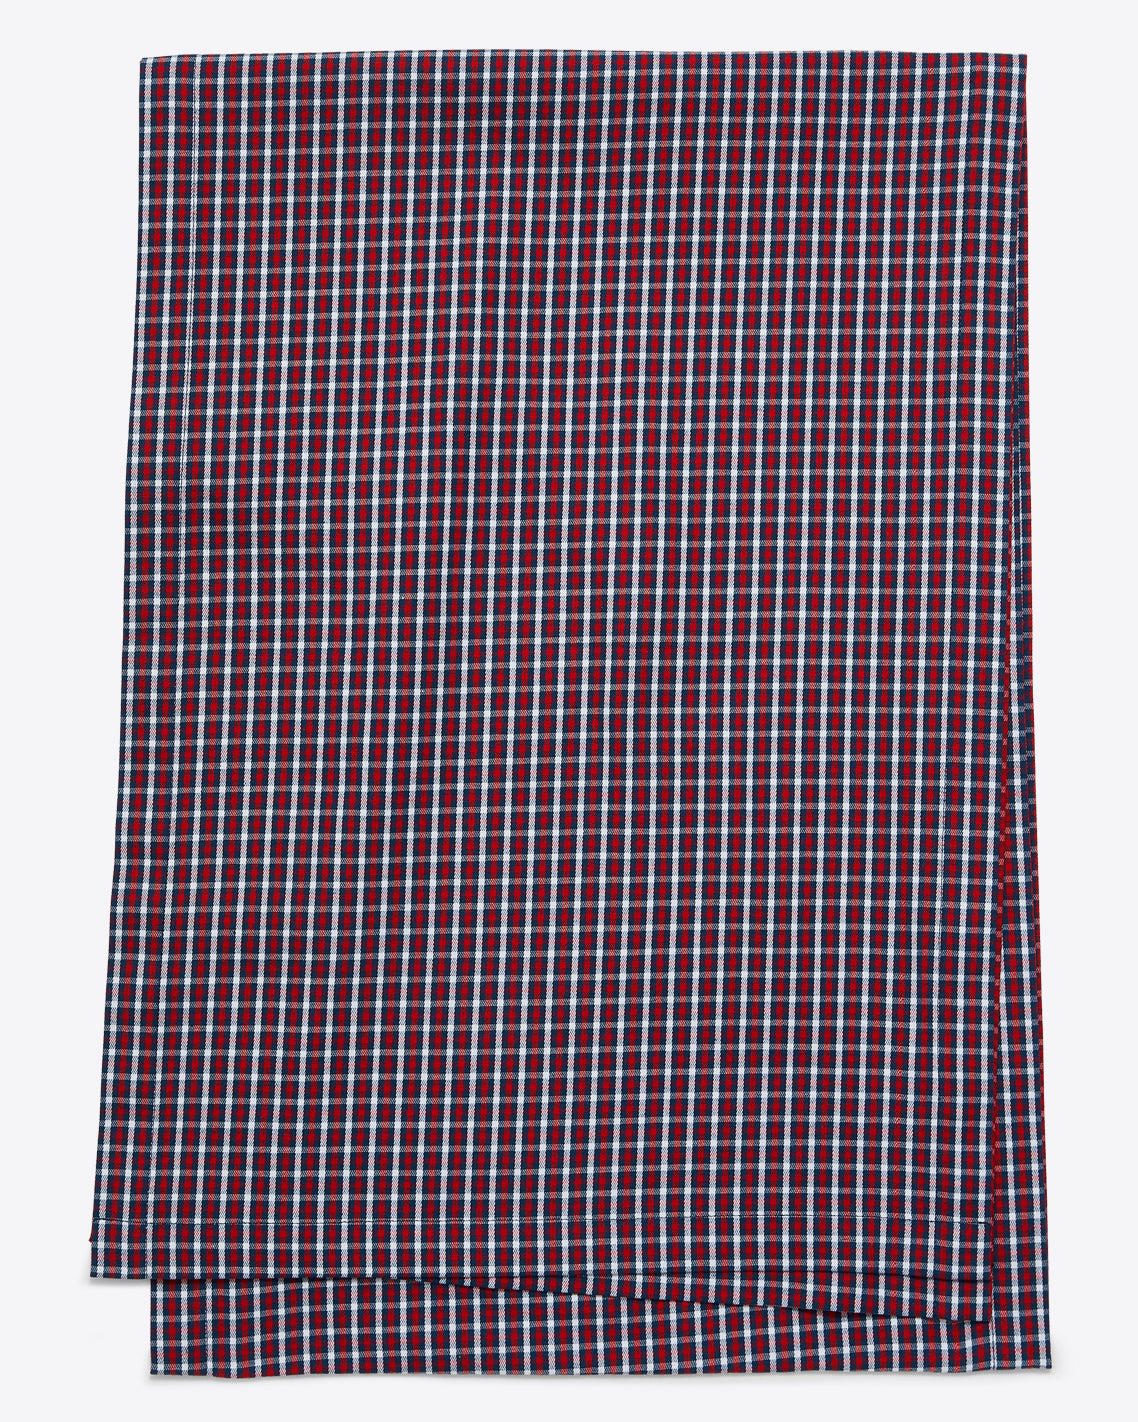 Table Runner in Picnic Plaid